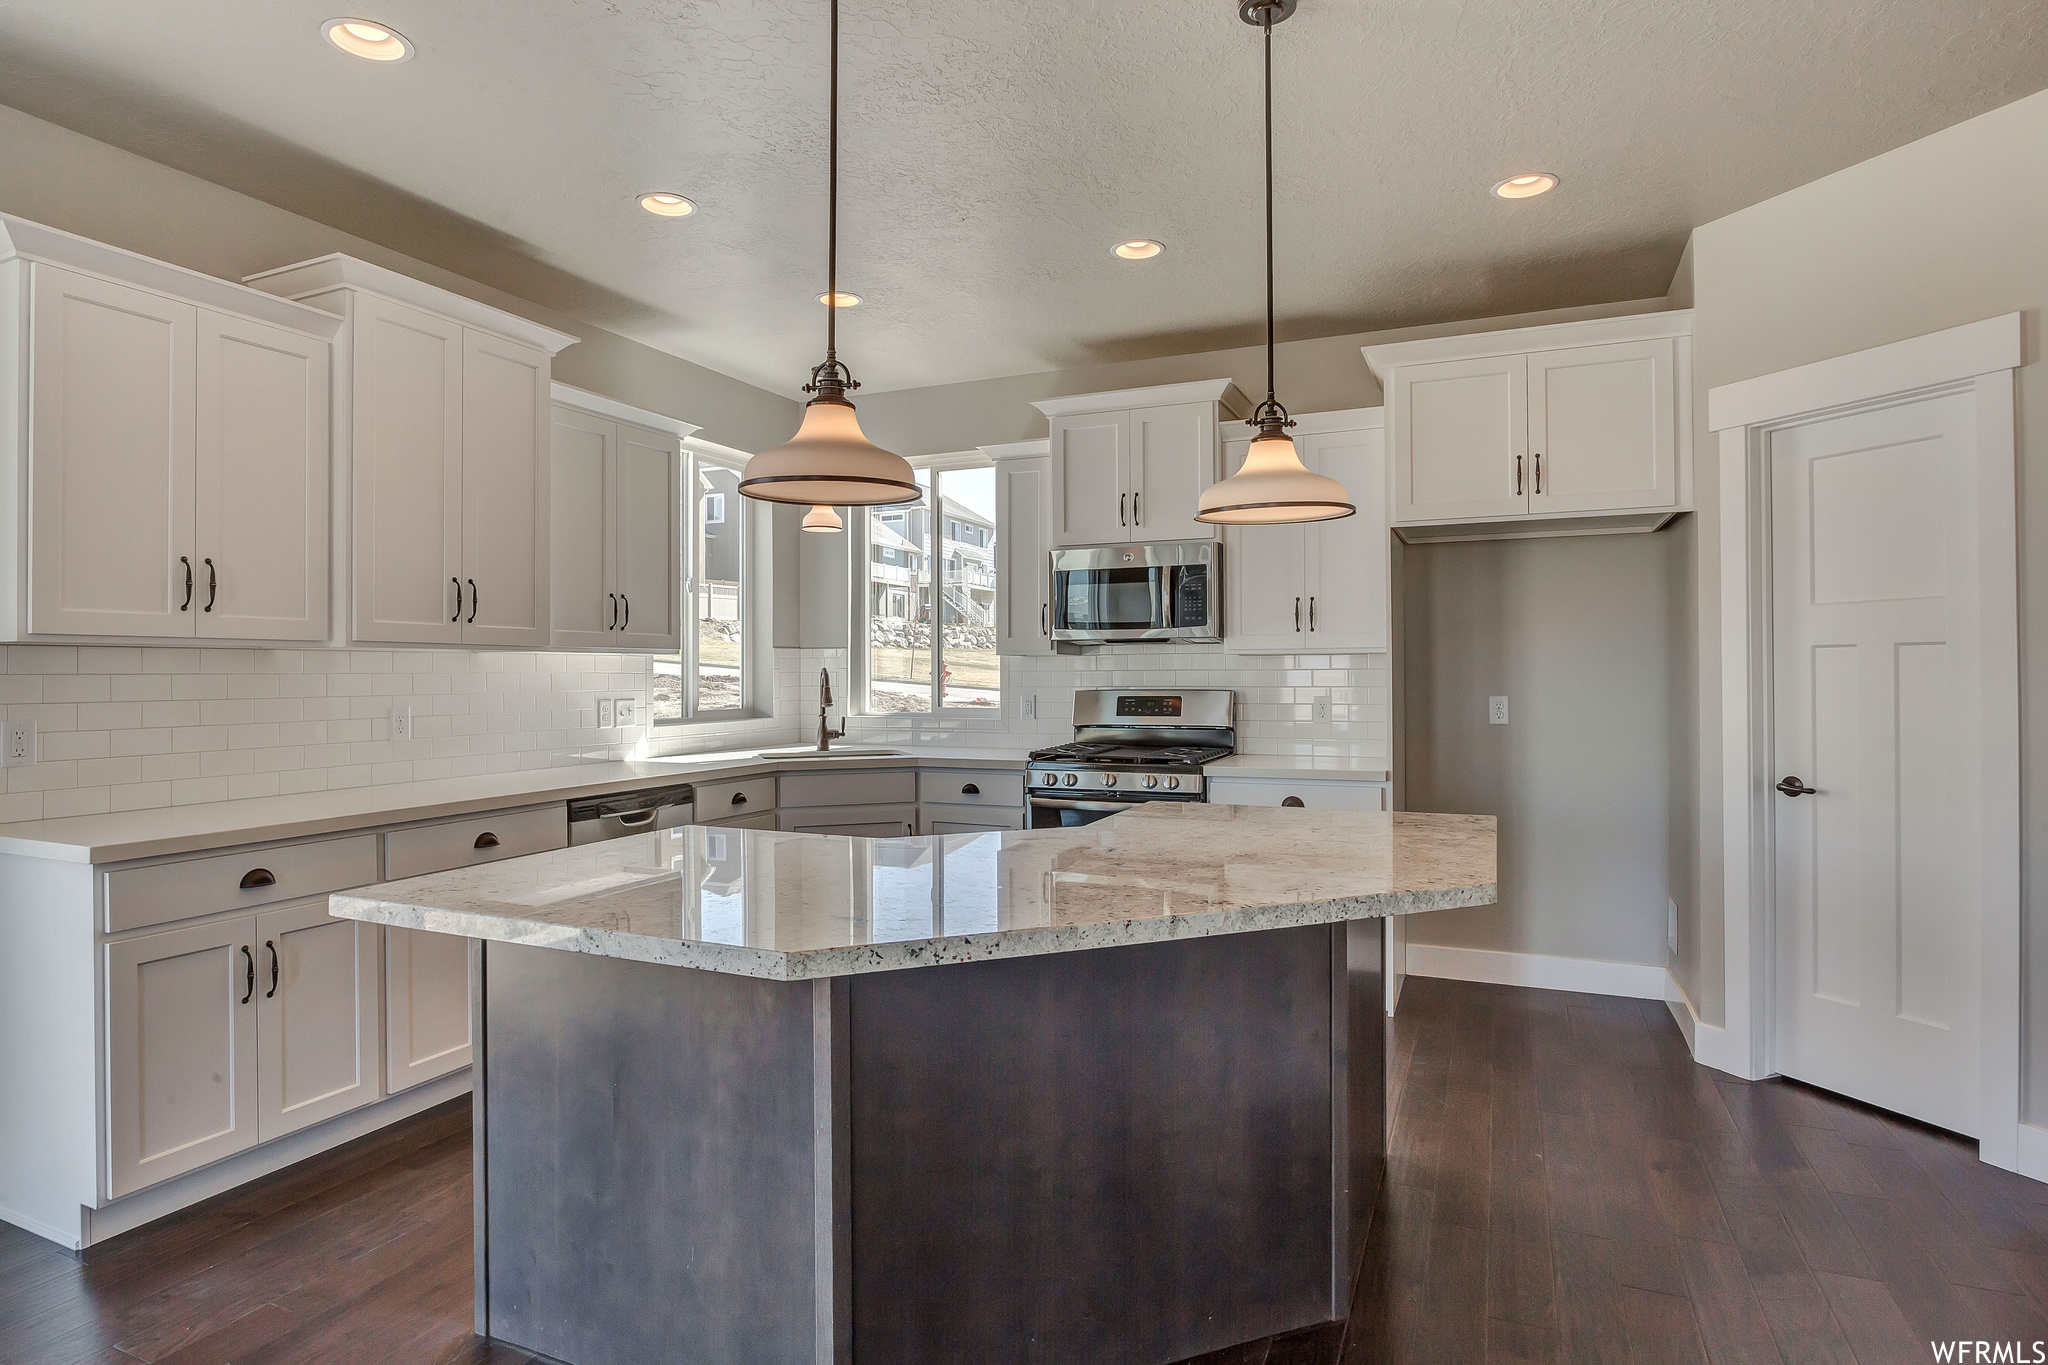 Kitchen featuring dark hardwood / wood-style floors, appliances with stainless steel finishes, decorative light fixtures, and white cabinetry